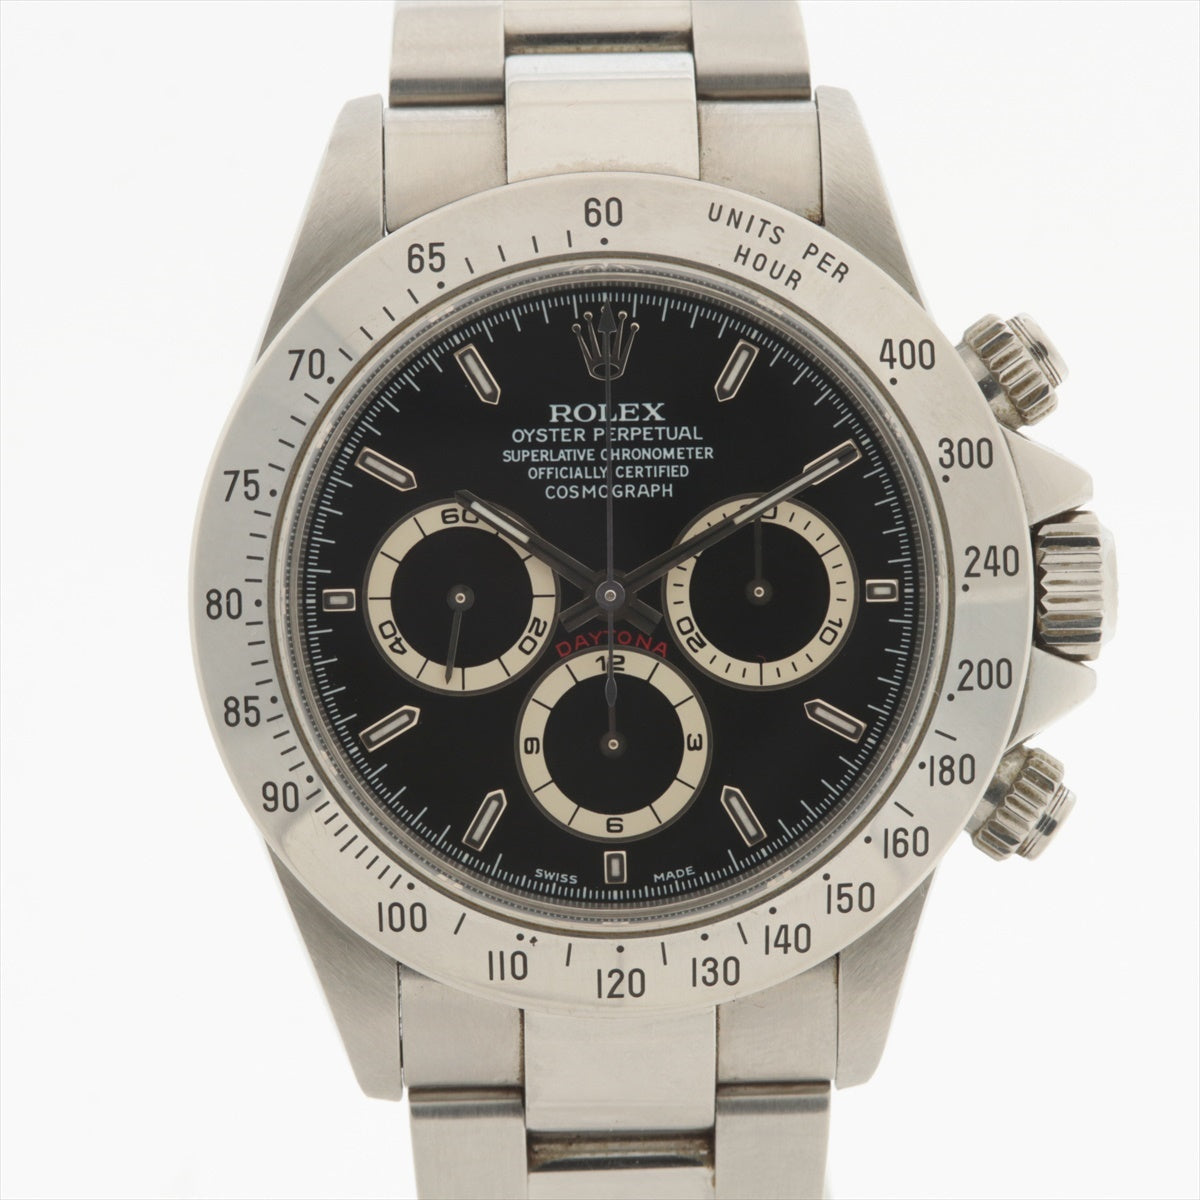 Rolex Cosmograph Daytona 16520 SS AT Black Dial 1 Extra Link